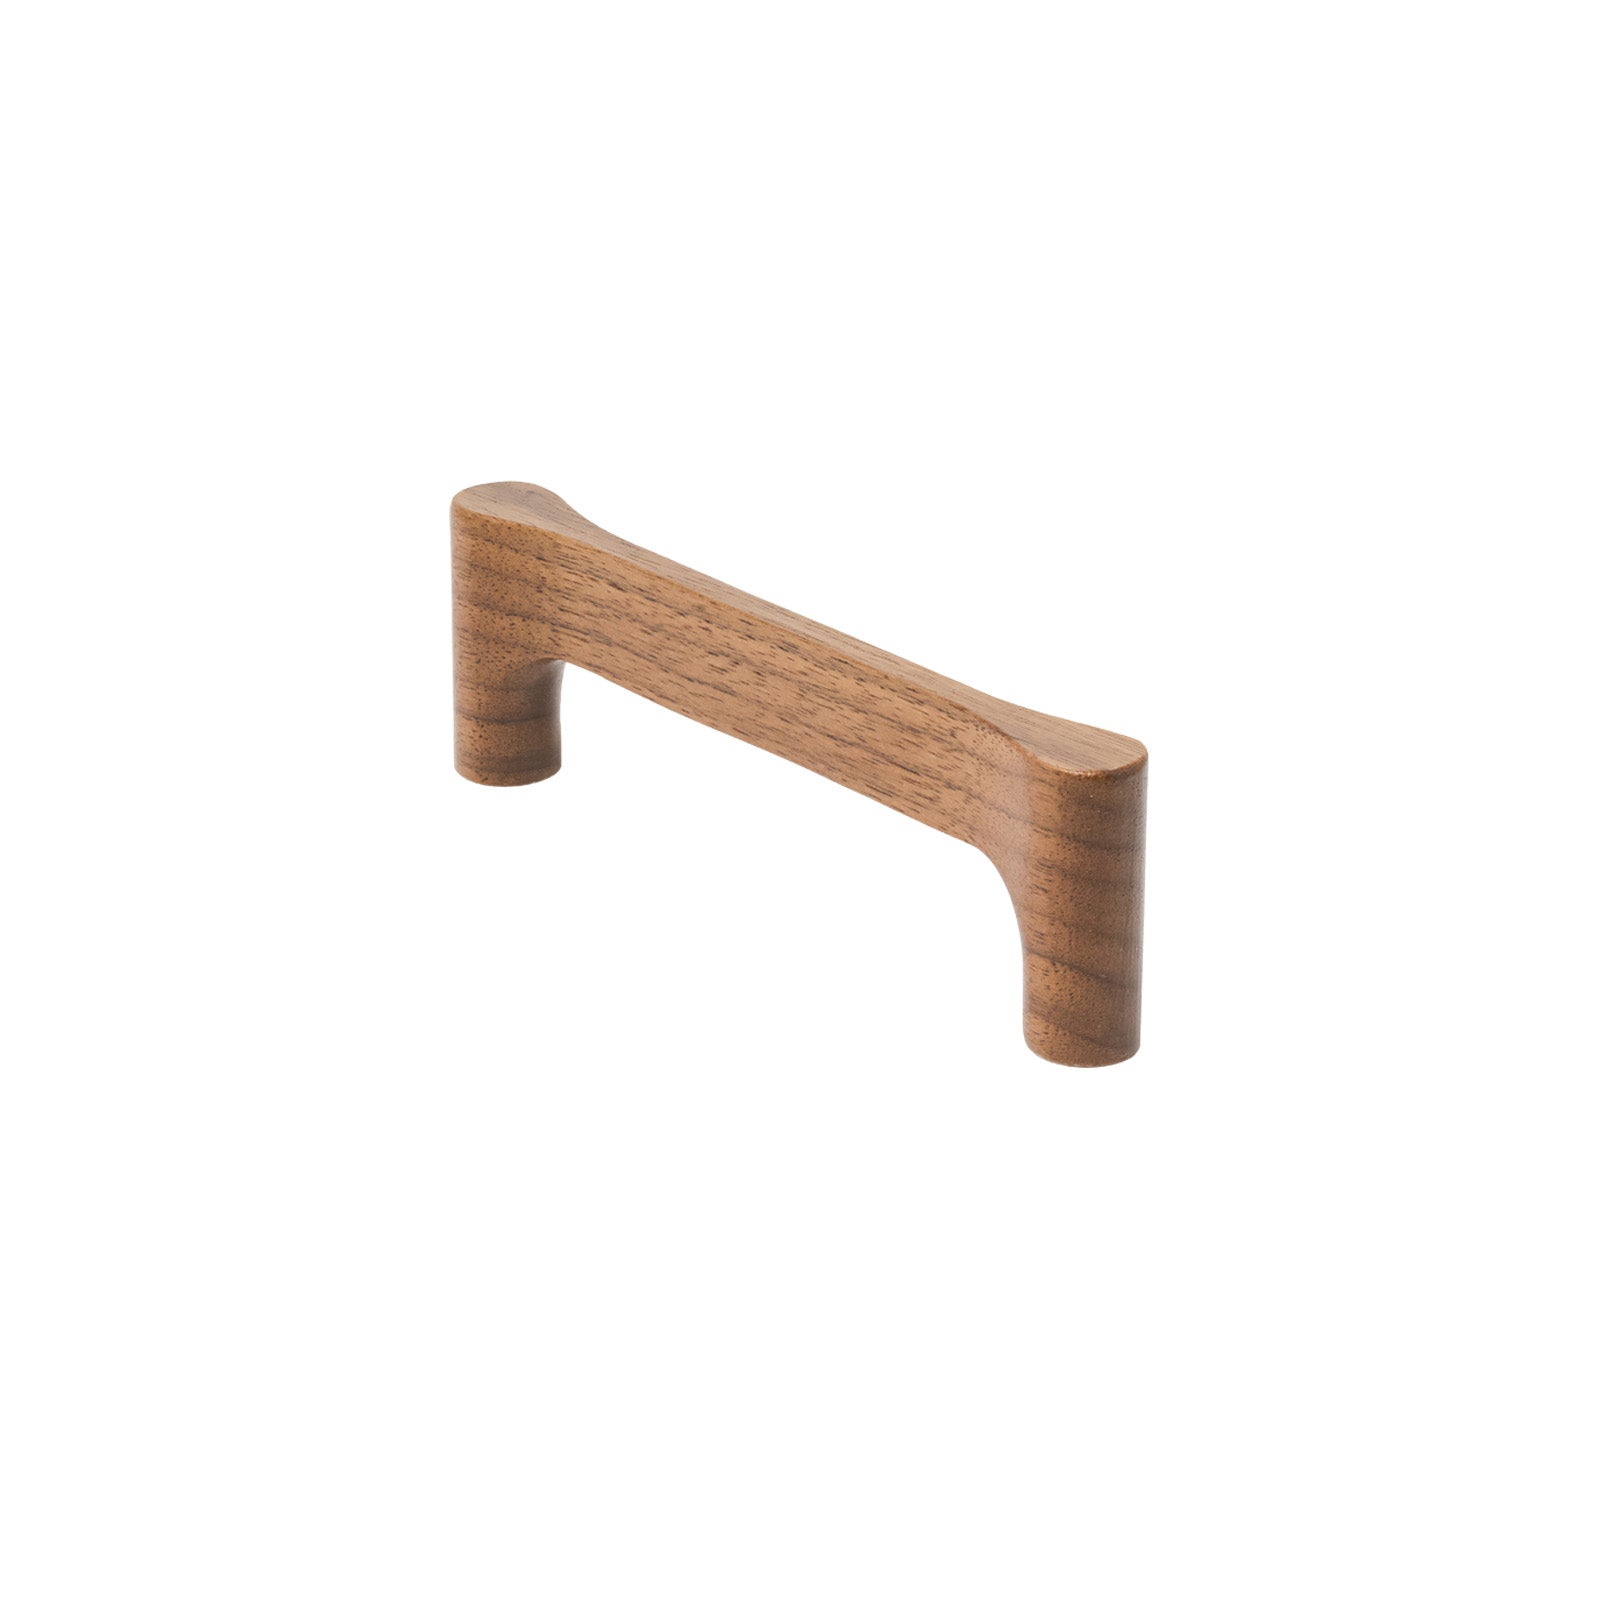 SHOW 128mm Gio Cabinet Pull Handle In Walnut Finish